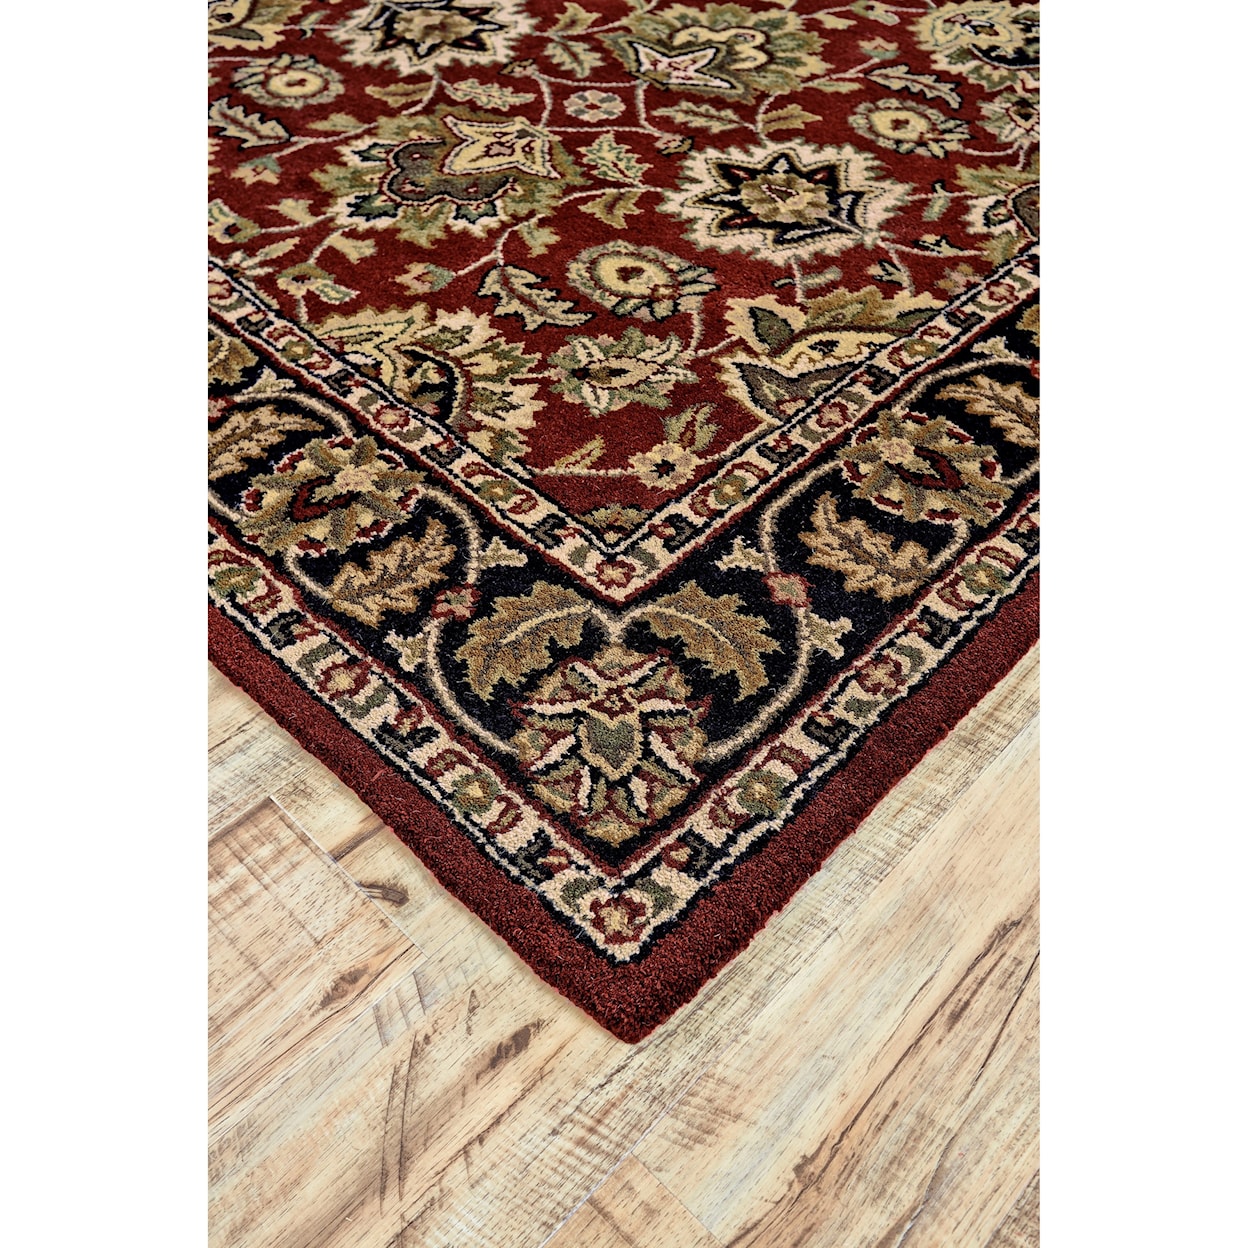 Feizy Rugs Yale Red/Black 2' x 3' Area Rug